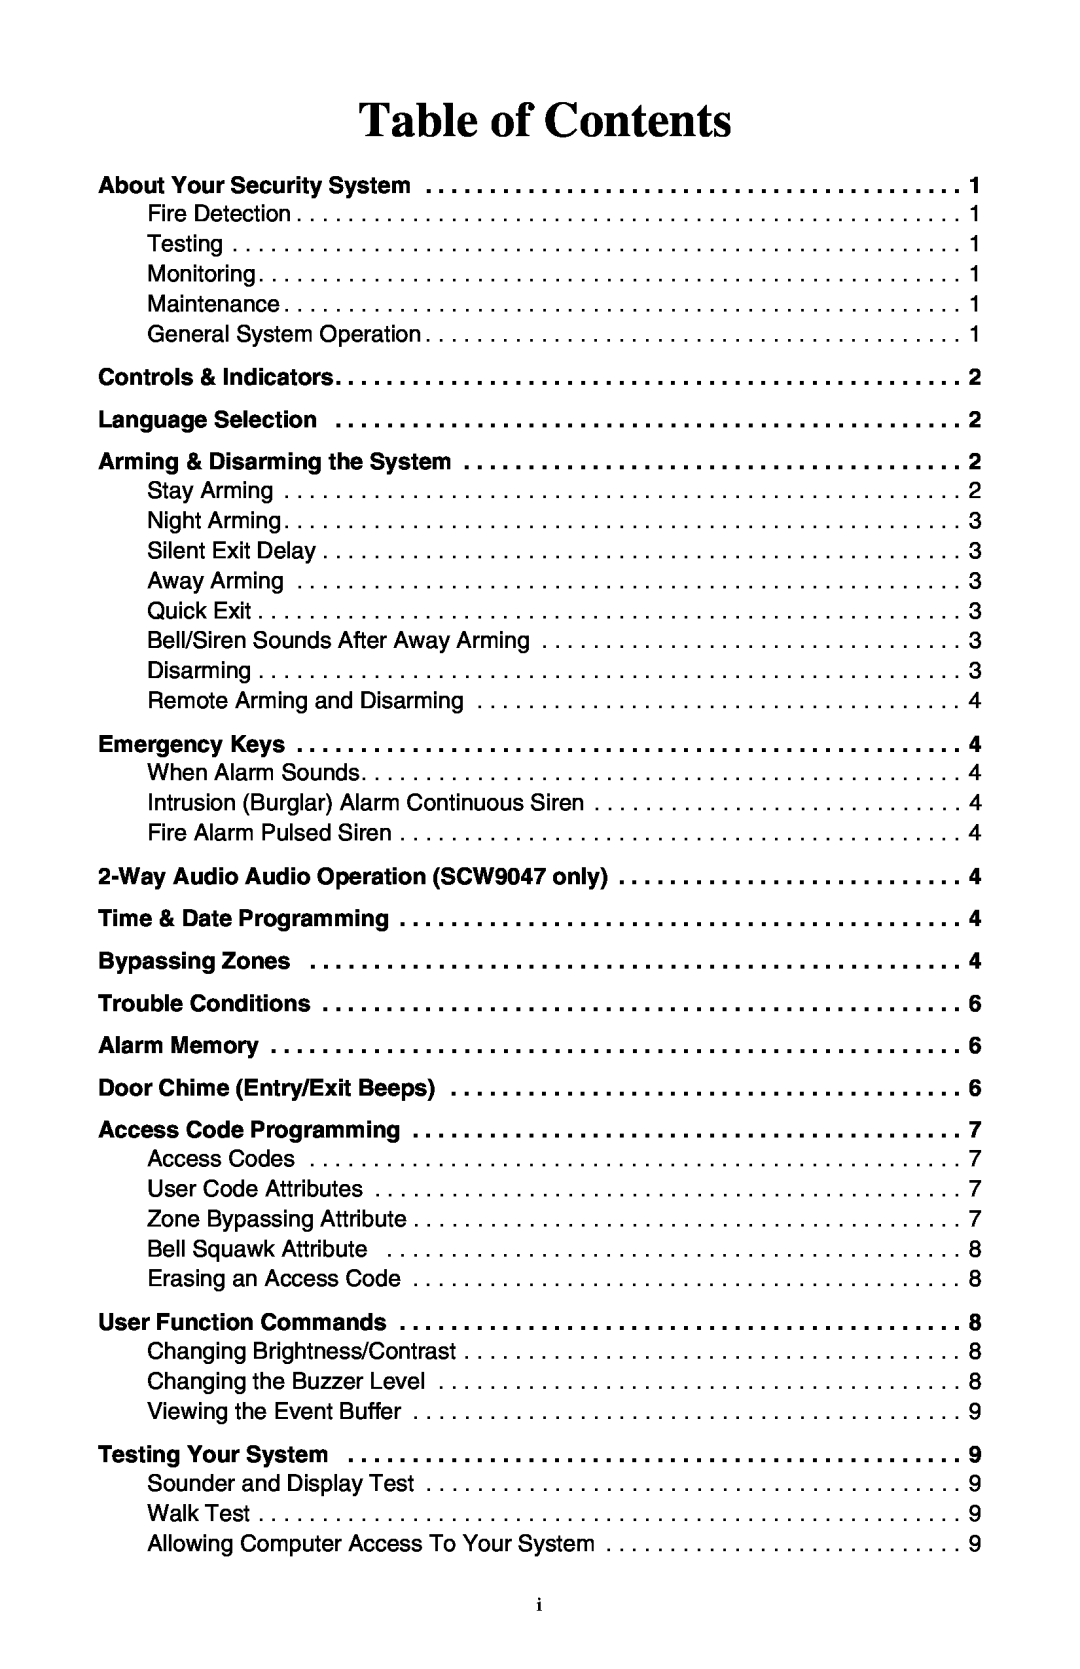 ADT Security Services SCW9047-433, SCW9045-433 manual Table of Contents 